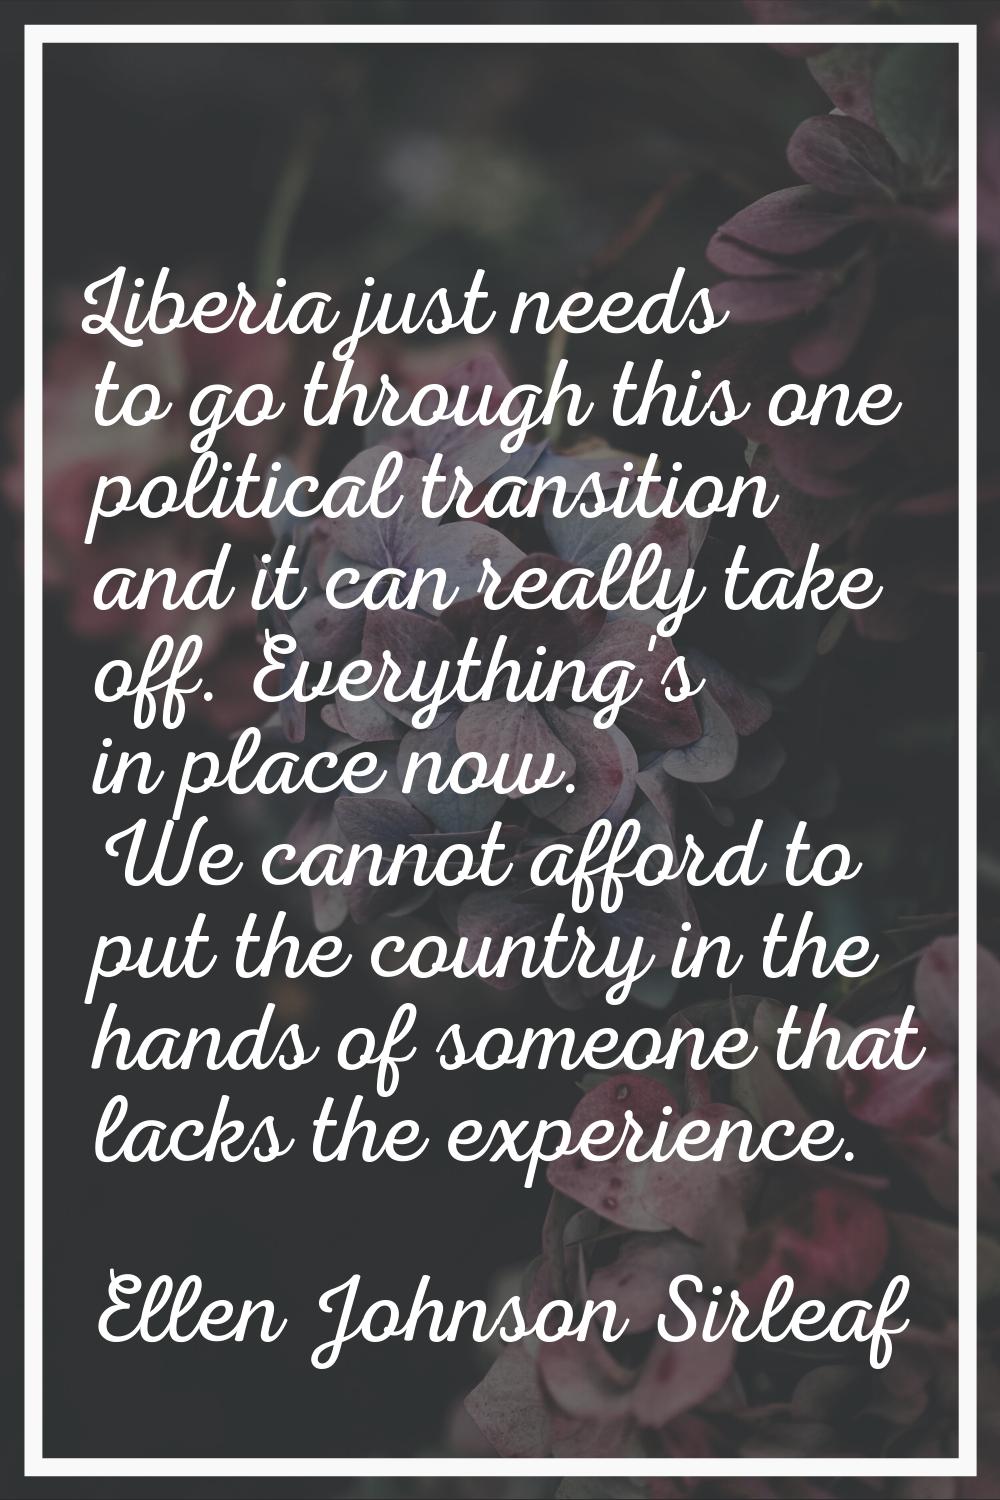 Liberia just needs to go through this one political transition and it can really take off. Everythi